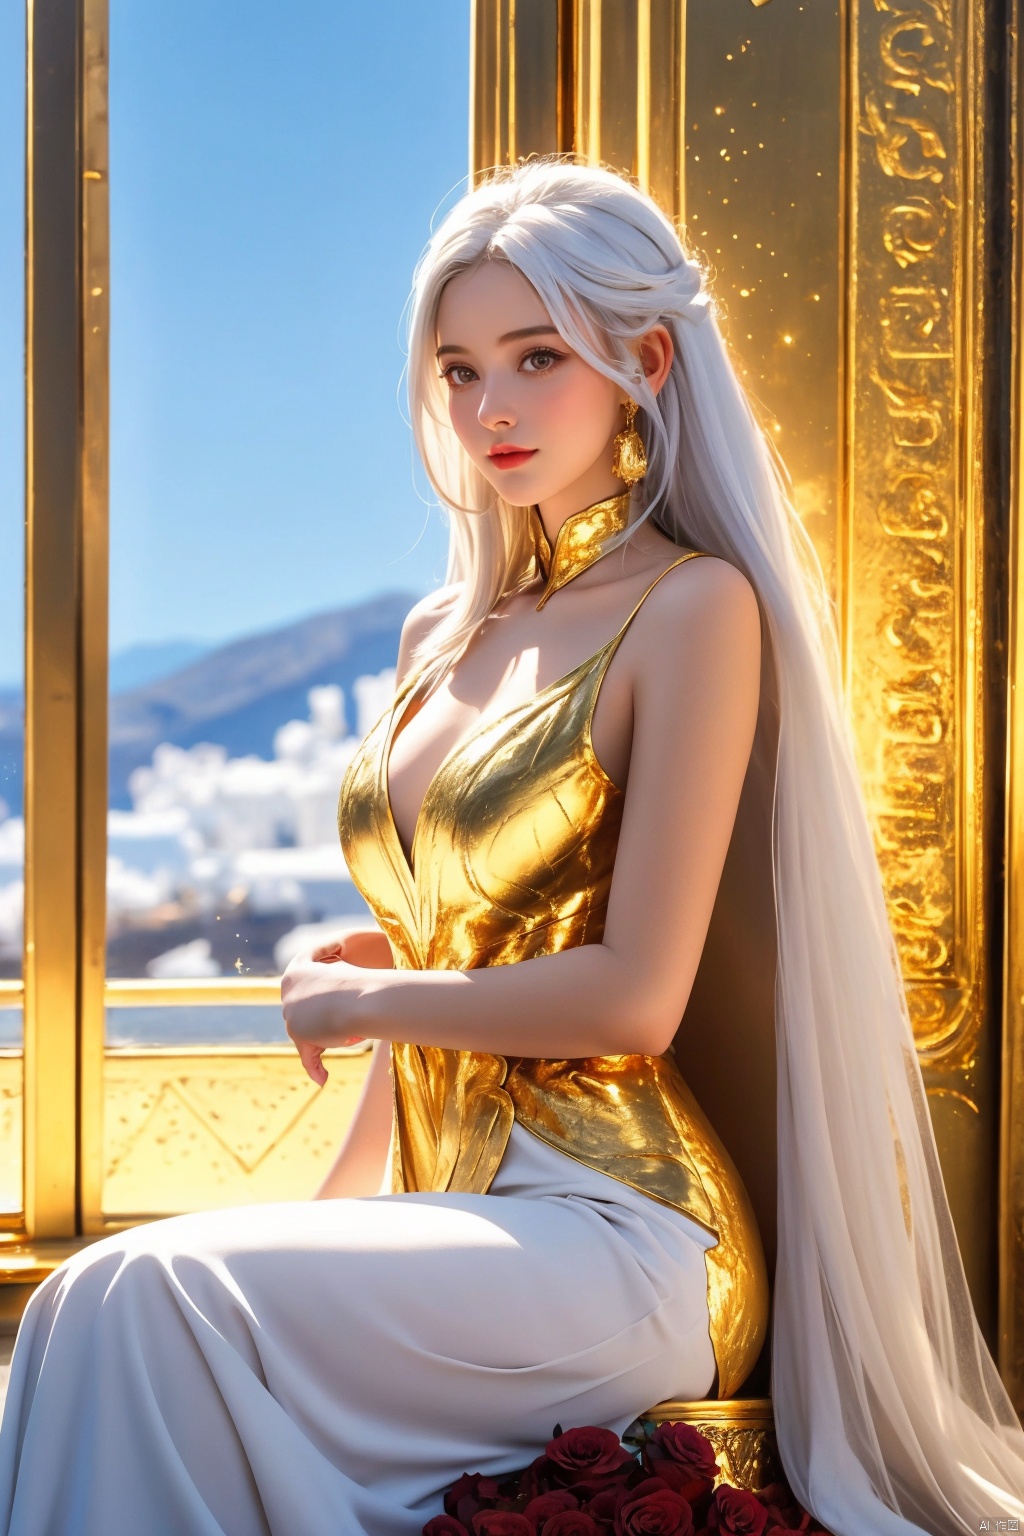 masterpiece, 1 girl, Look at me, Mnemosyne, White hair, Greek dress, Palace, Sitting on the throne, resplendent, Lots of roses, gilded, MYTHOS, Gold powder, Golden glow, textured skin, super detail, best quality, 16k, Blue sky outside the window, Ancient Greece